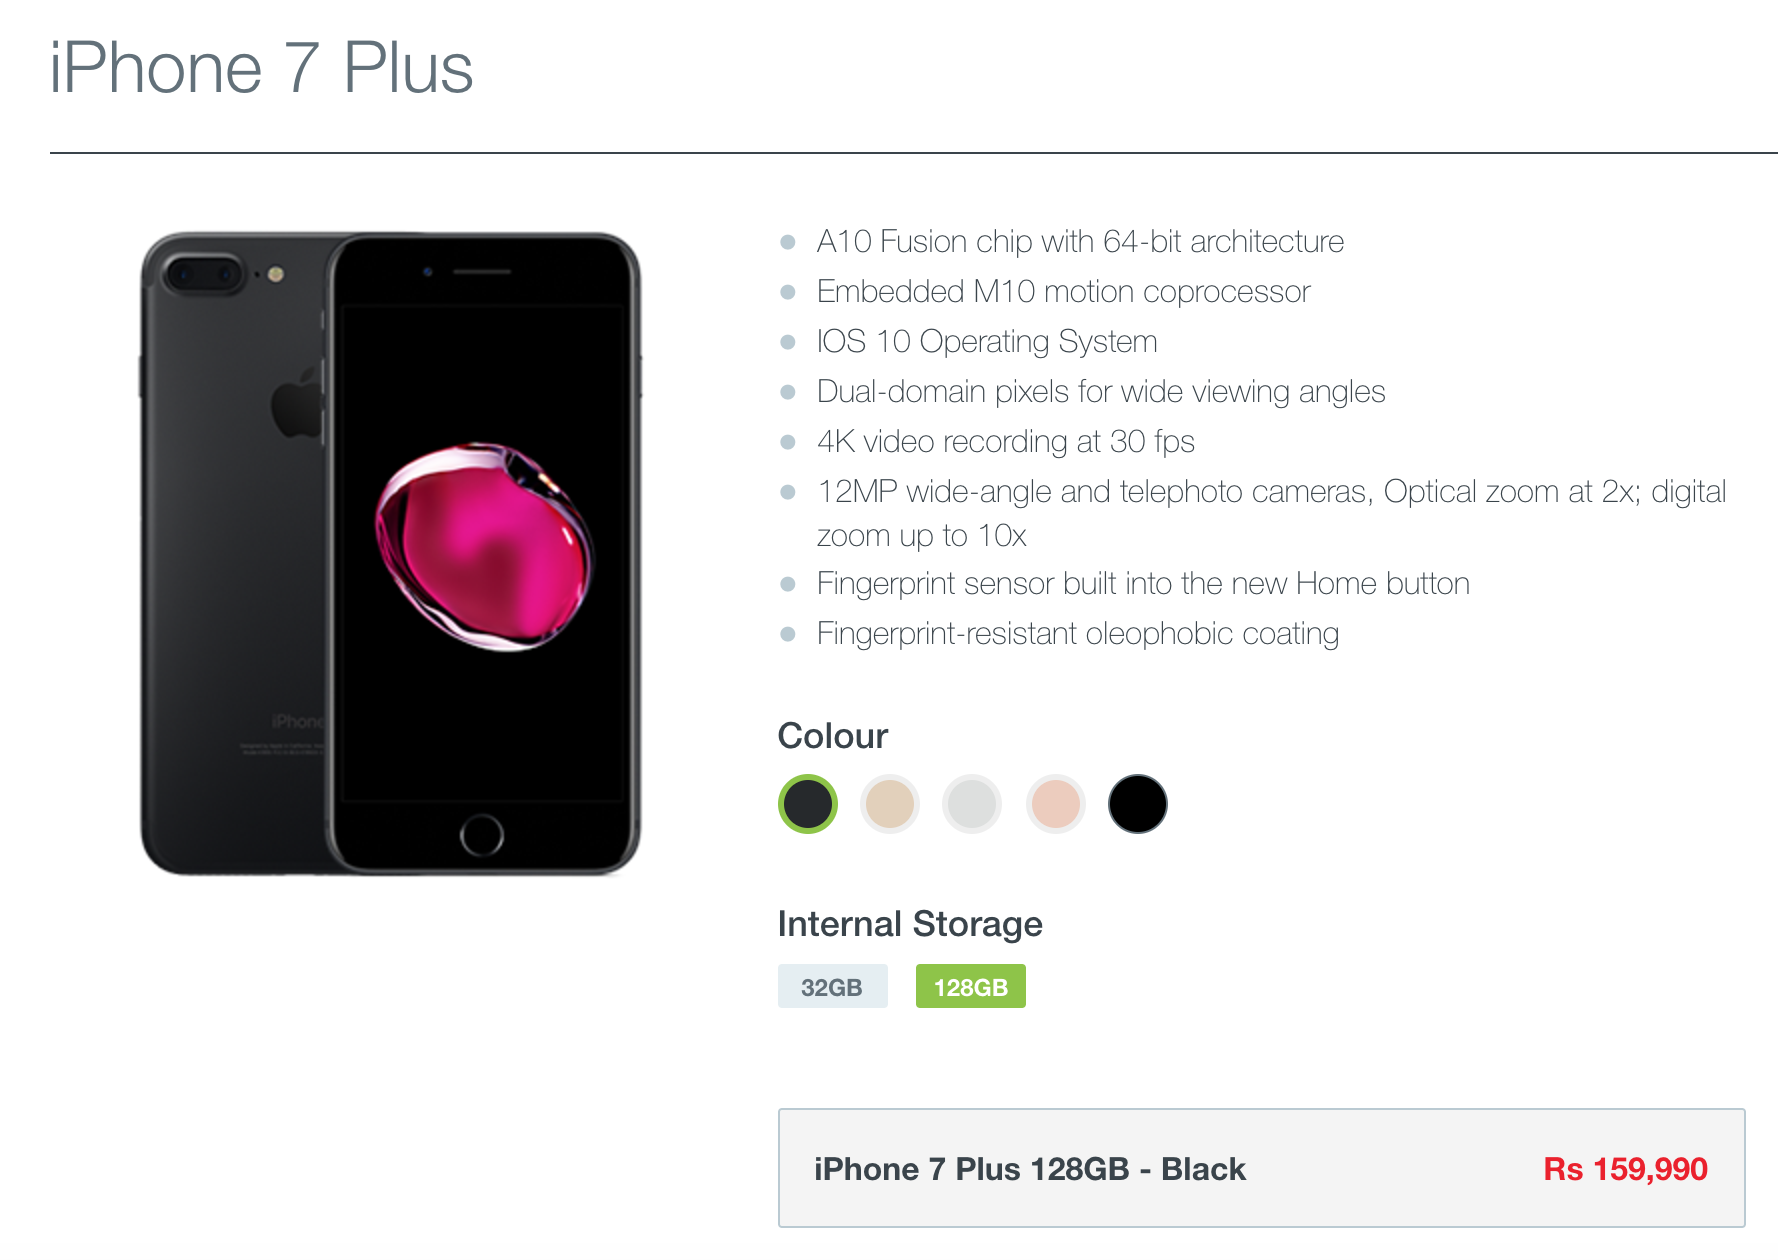 iPhone 7 Plus 128GB Dialog Andro Dollar - Dialog launches the iPhone 7 and iPhone 7 Plus in Sri Lanka